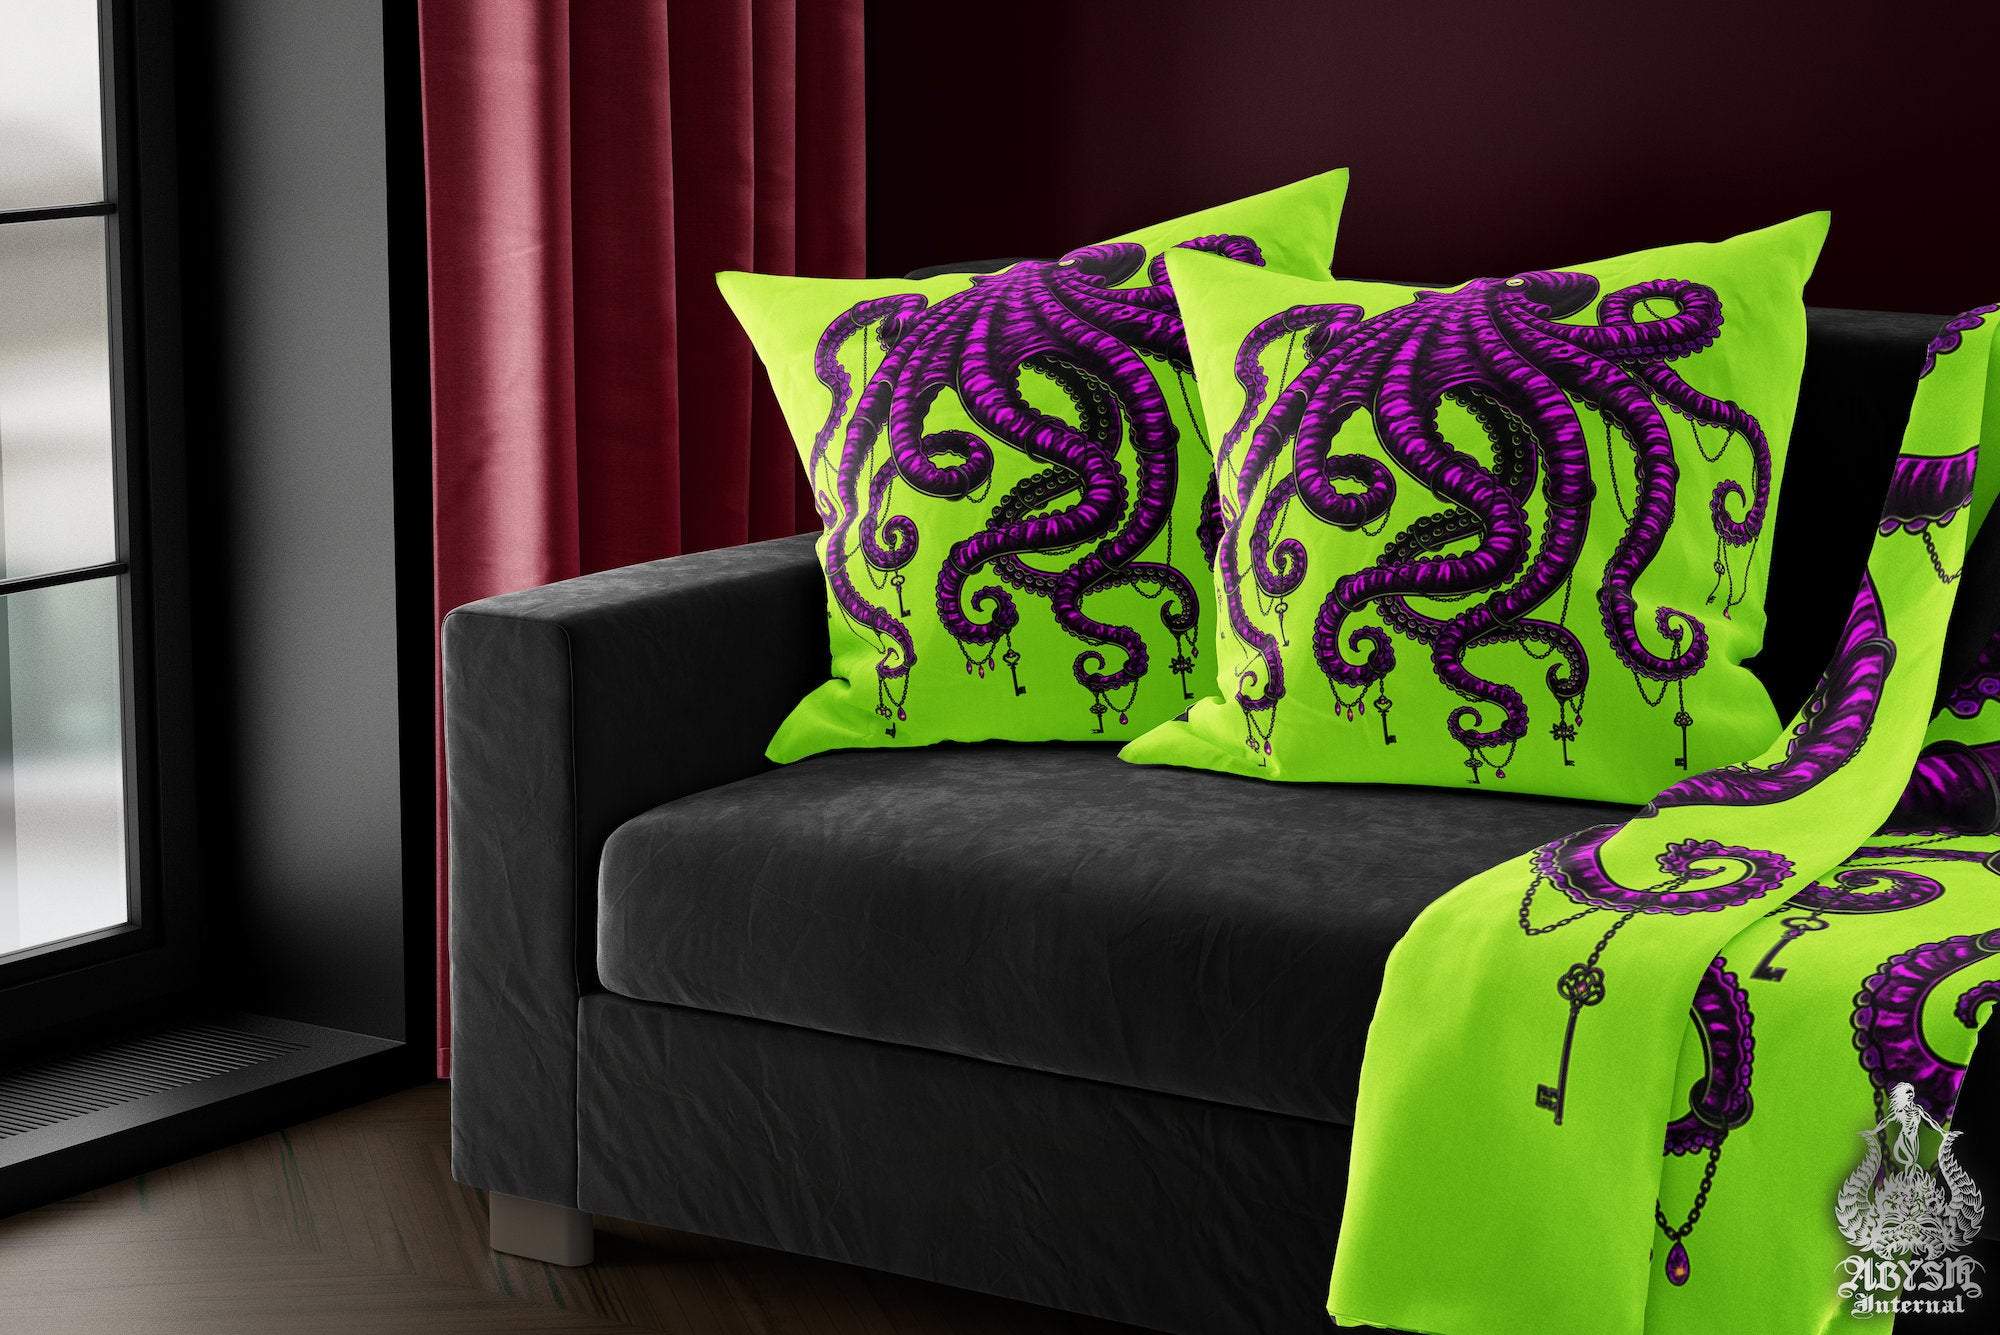 Octopus Throw Pillow, Decorative Accent Cushion, Eclectic Gamer Room Decor, Alternative Home - Neon Gothic - Abysm Internal